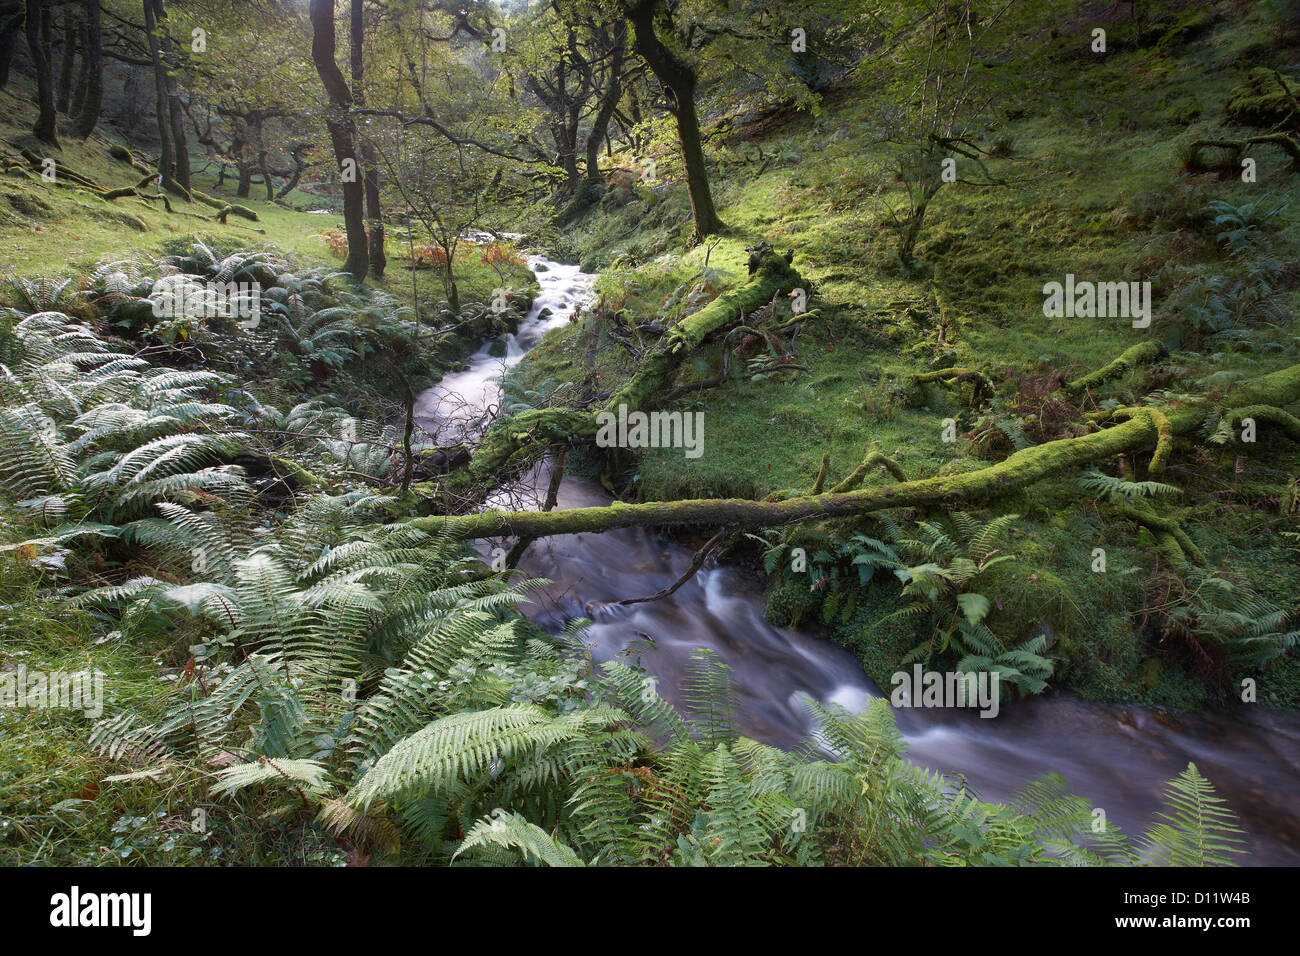 Stream flowing through the moss covered understorey of Dunkery and Horner Wood, Exmoor National Park, UK Stock Photo